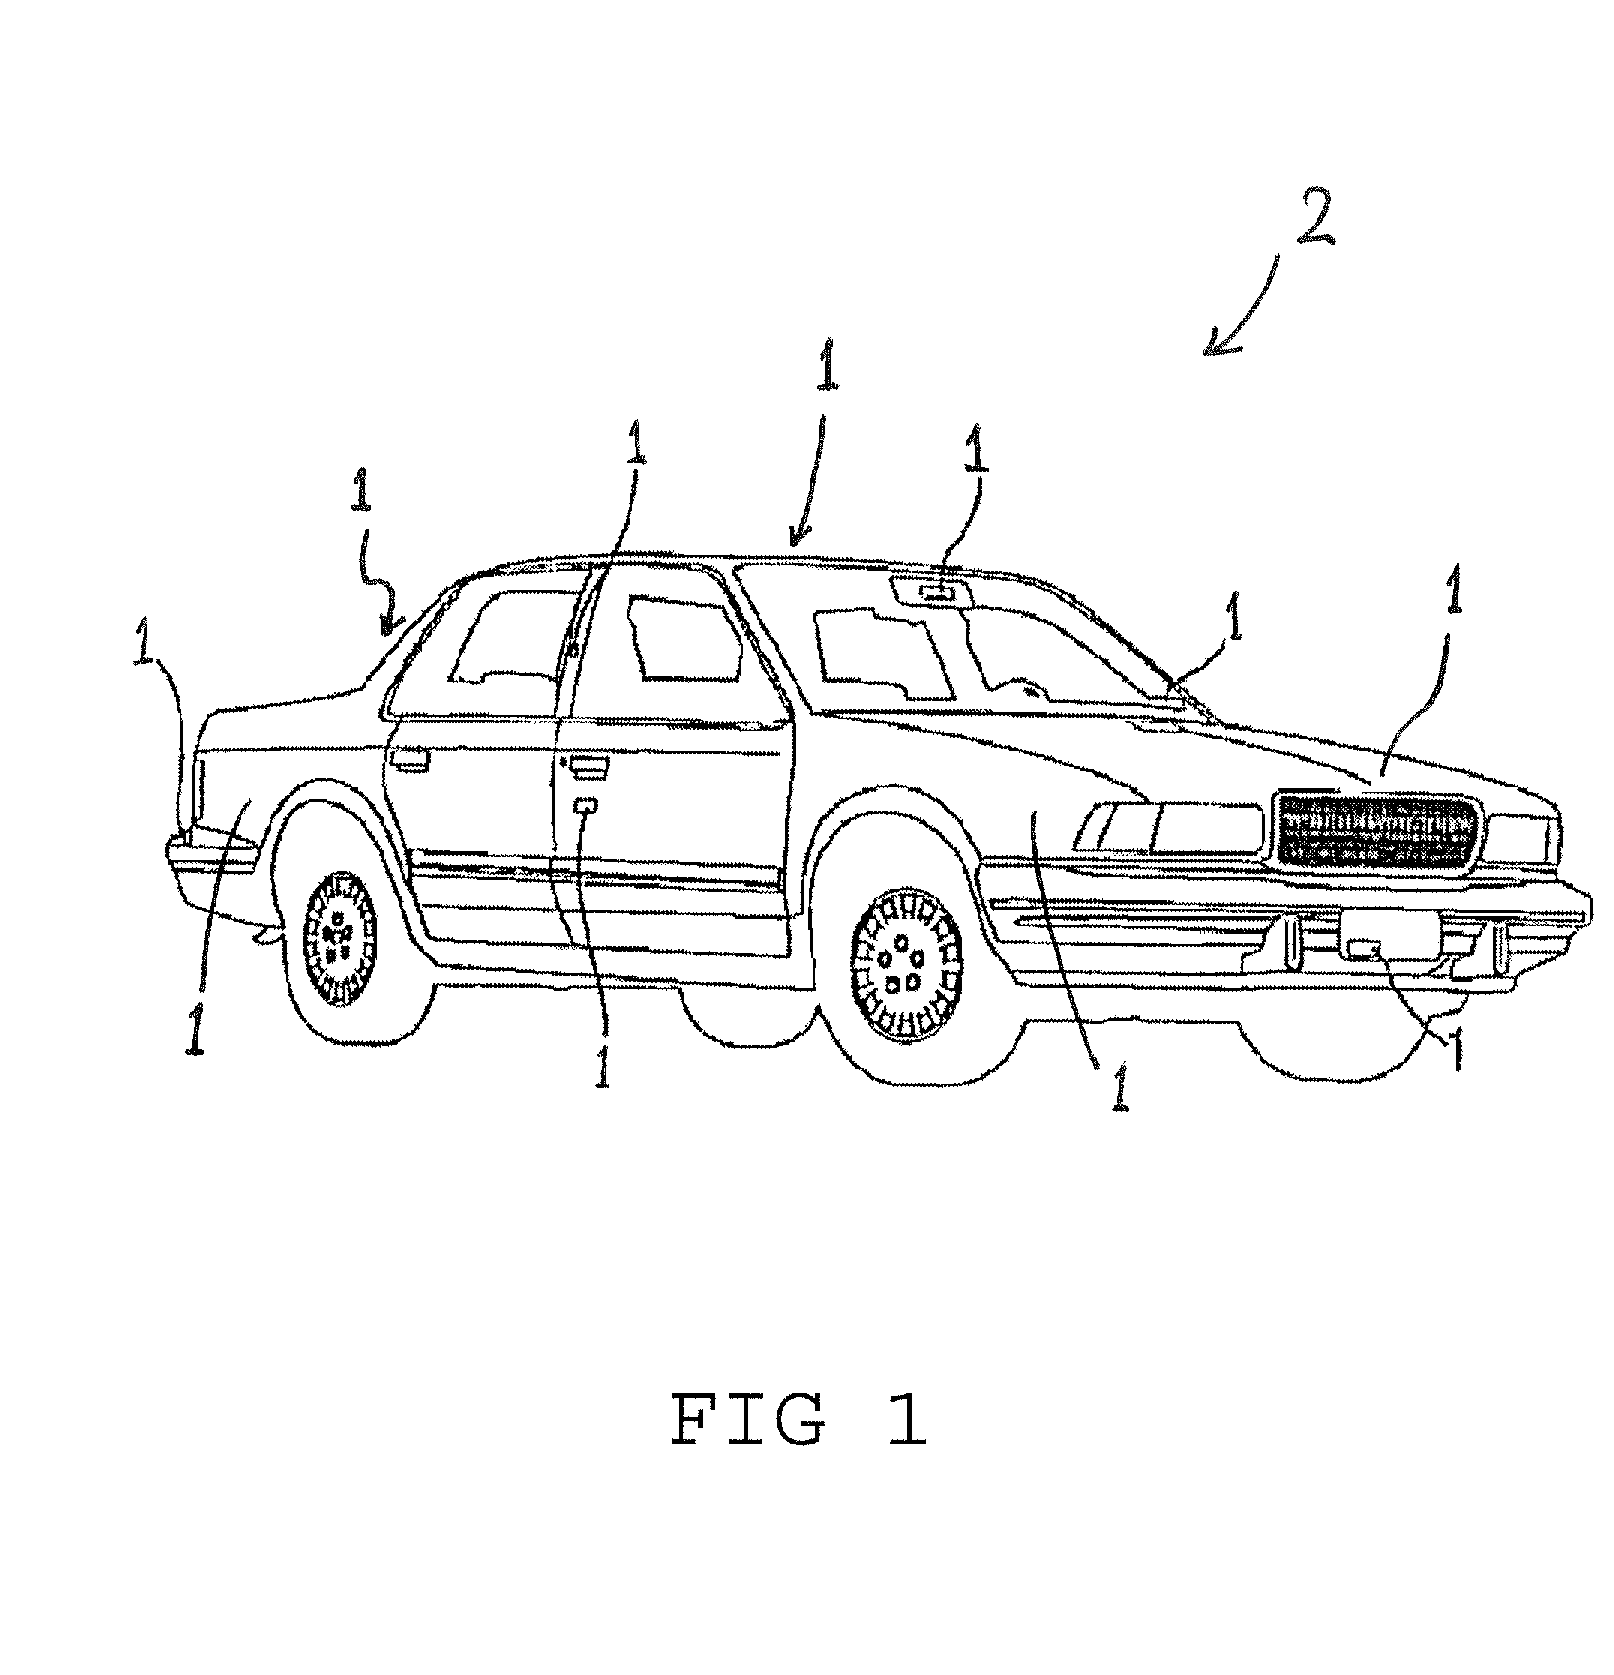 System and method for identifying vehicles and collecting fees for vehicle uses of land-ways, sea-ways and air-ways